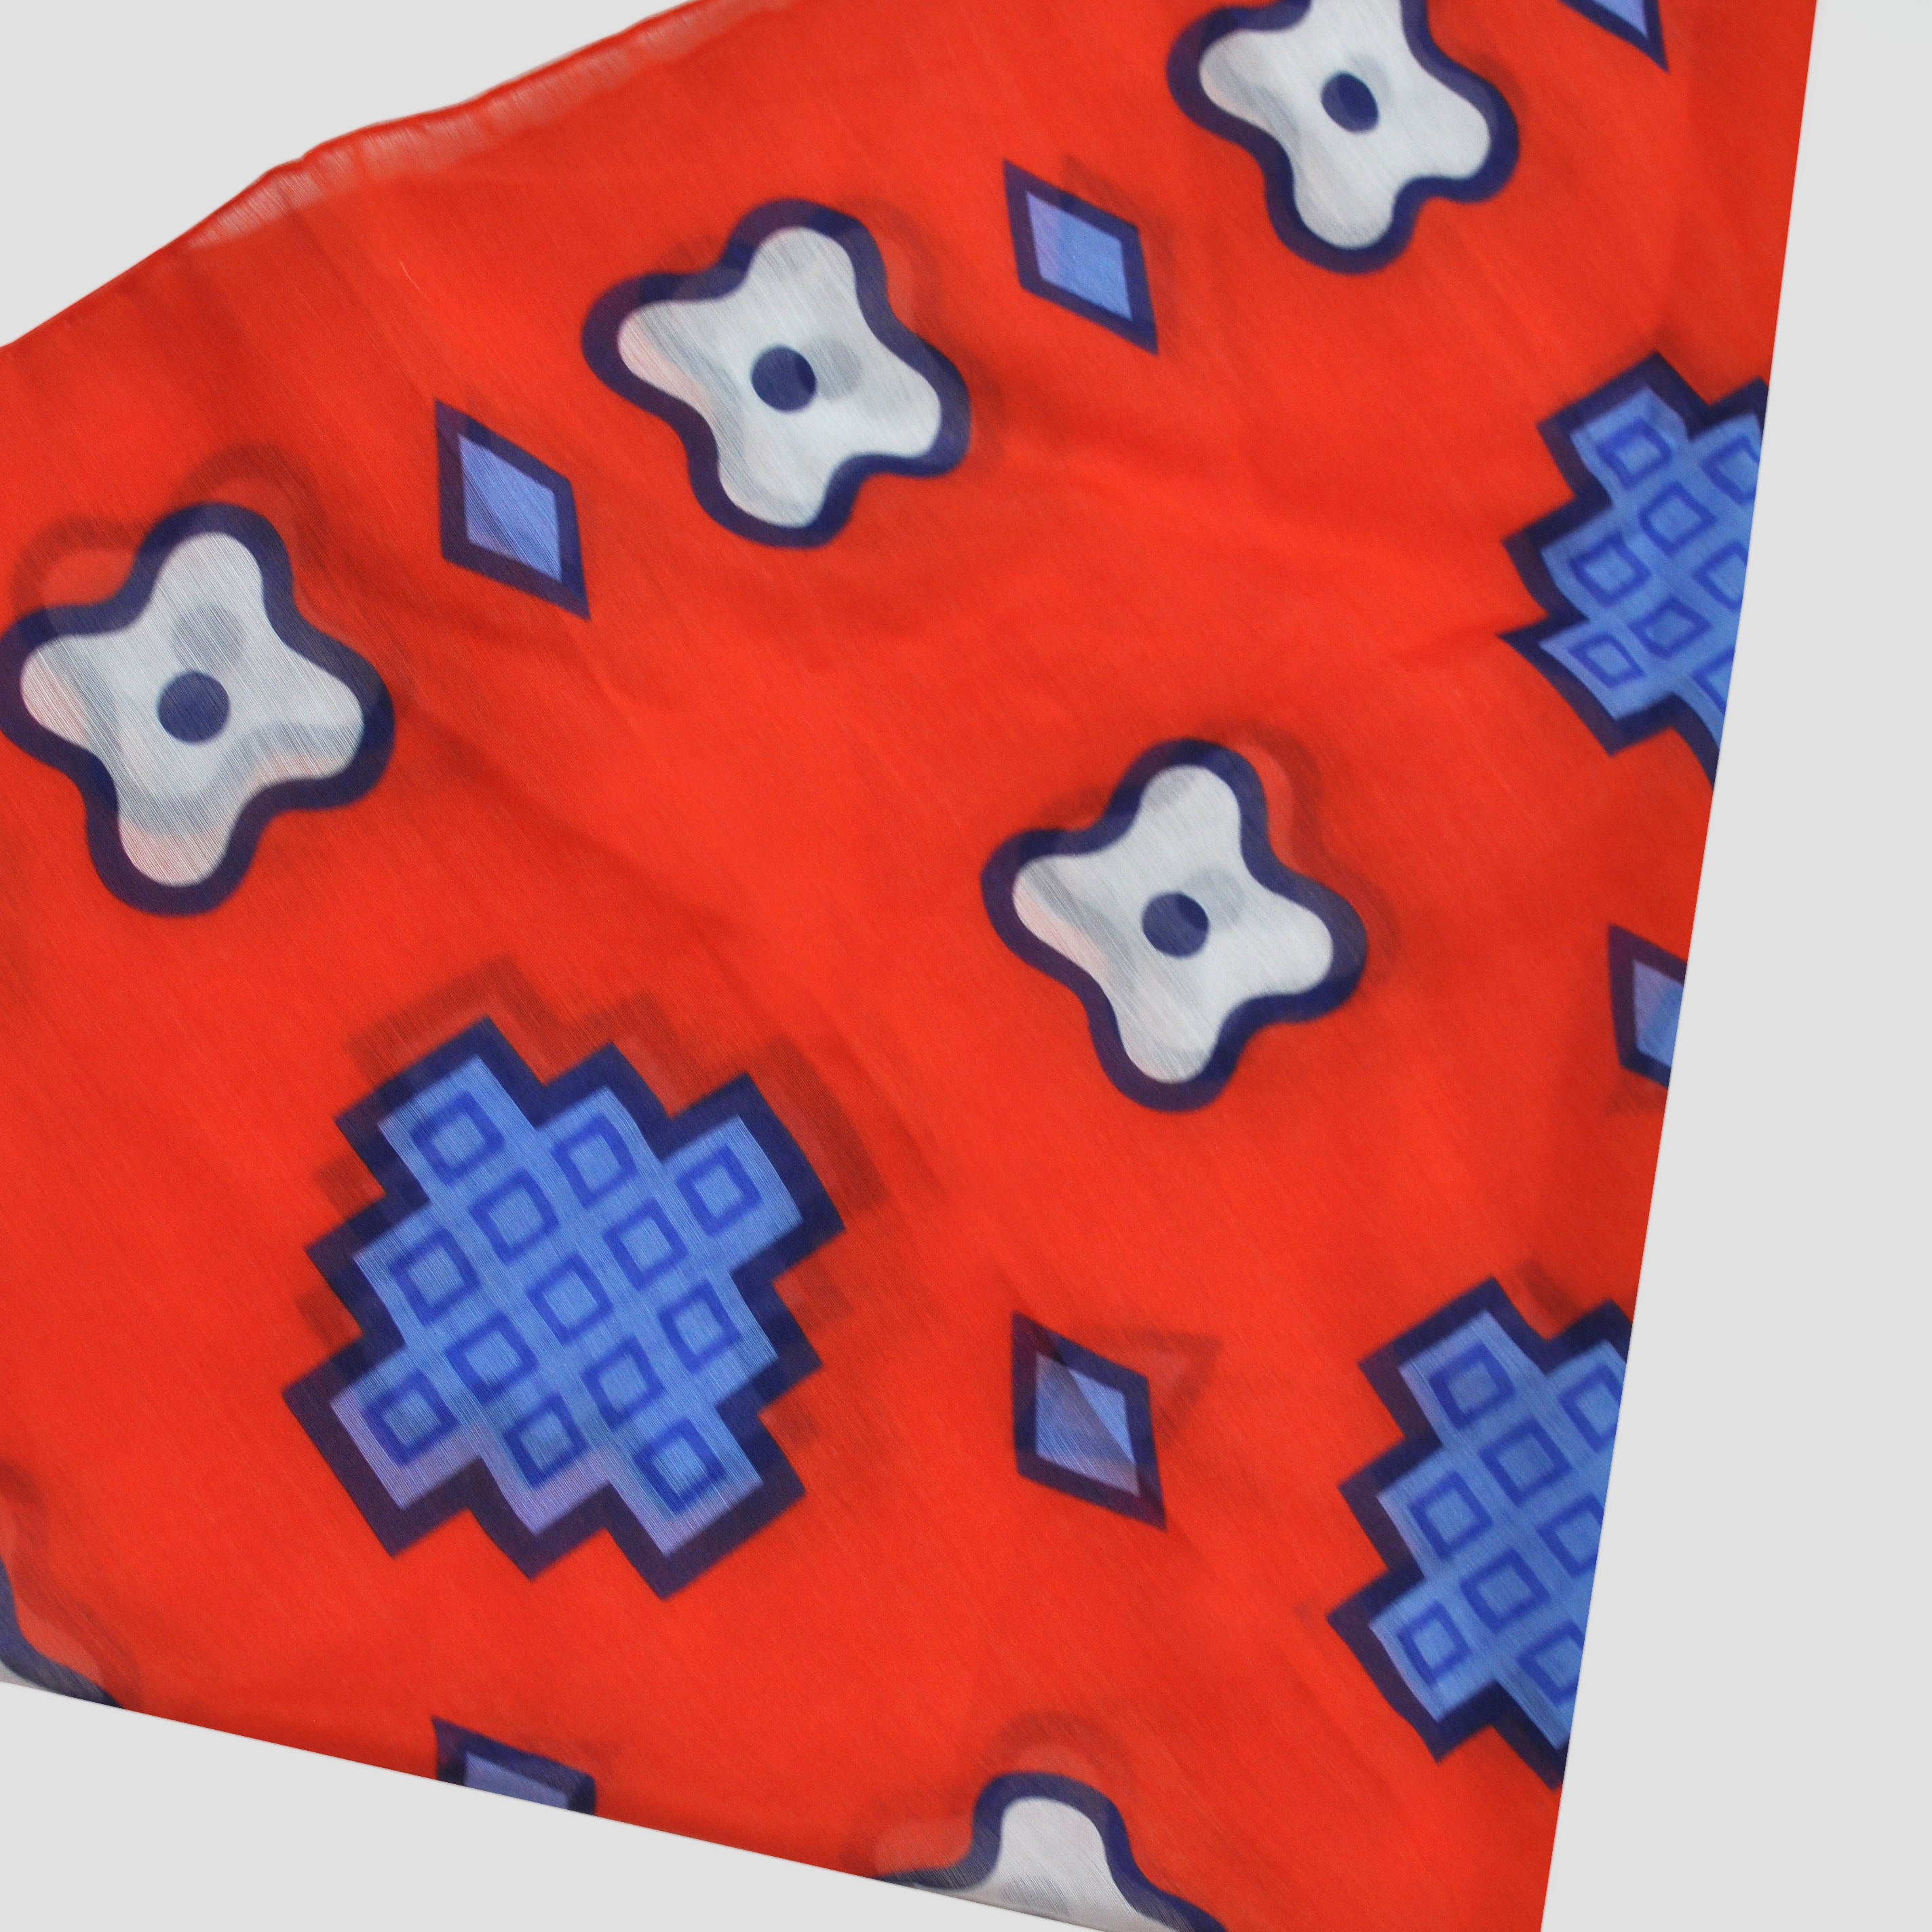 Mix of Shapes Bandana in Red, Blue & White